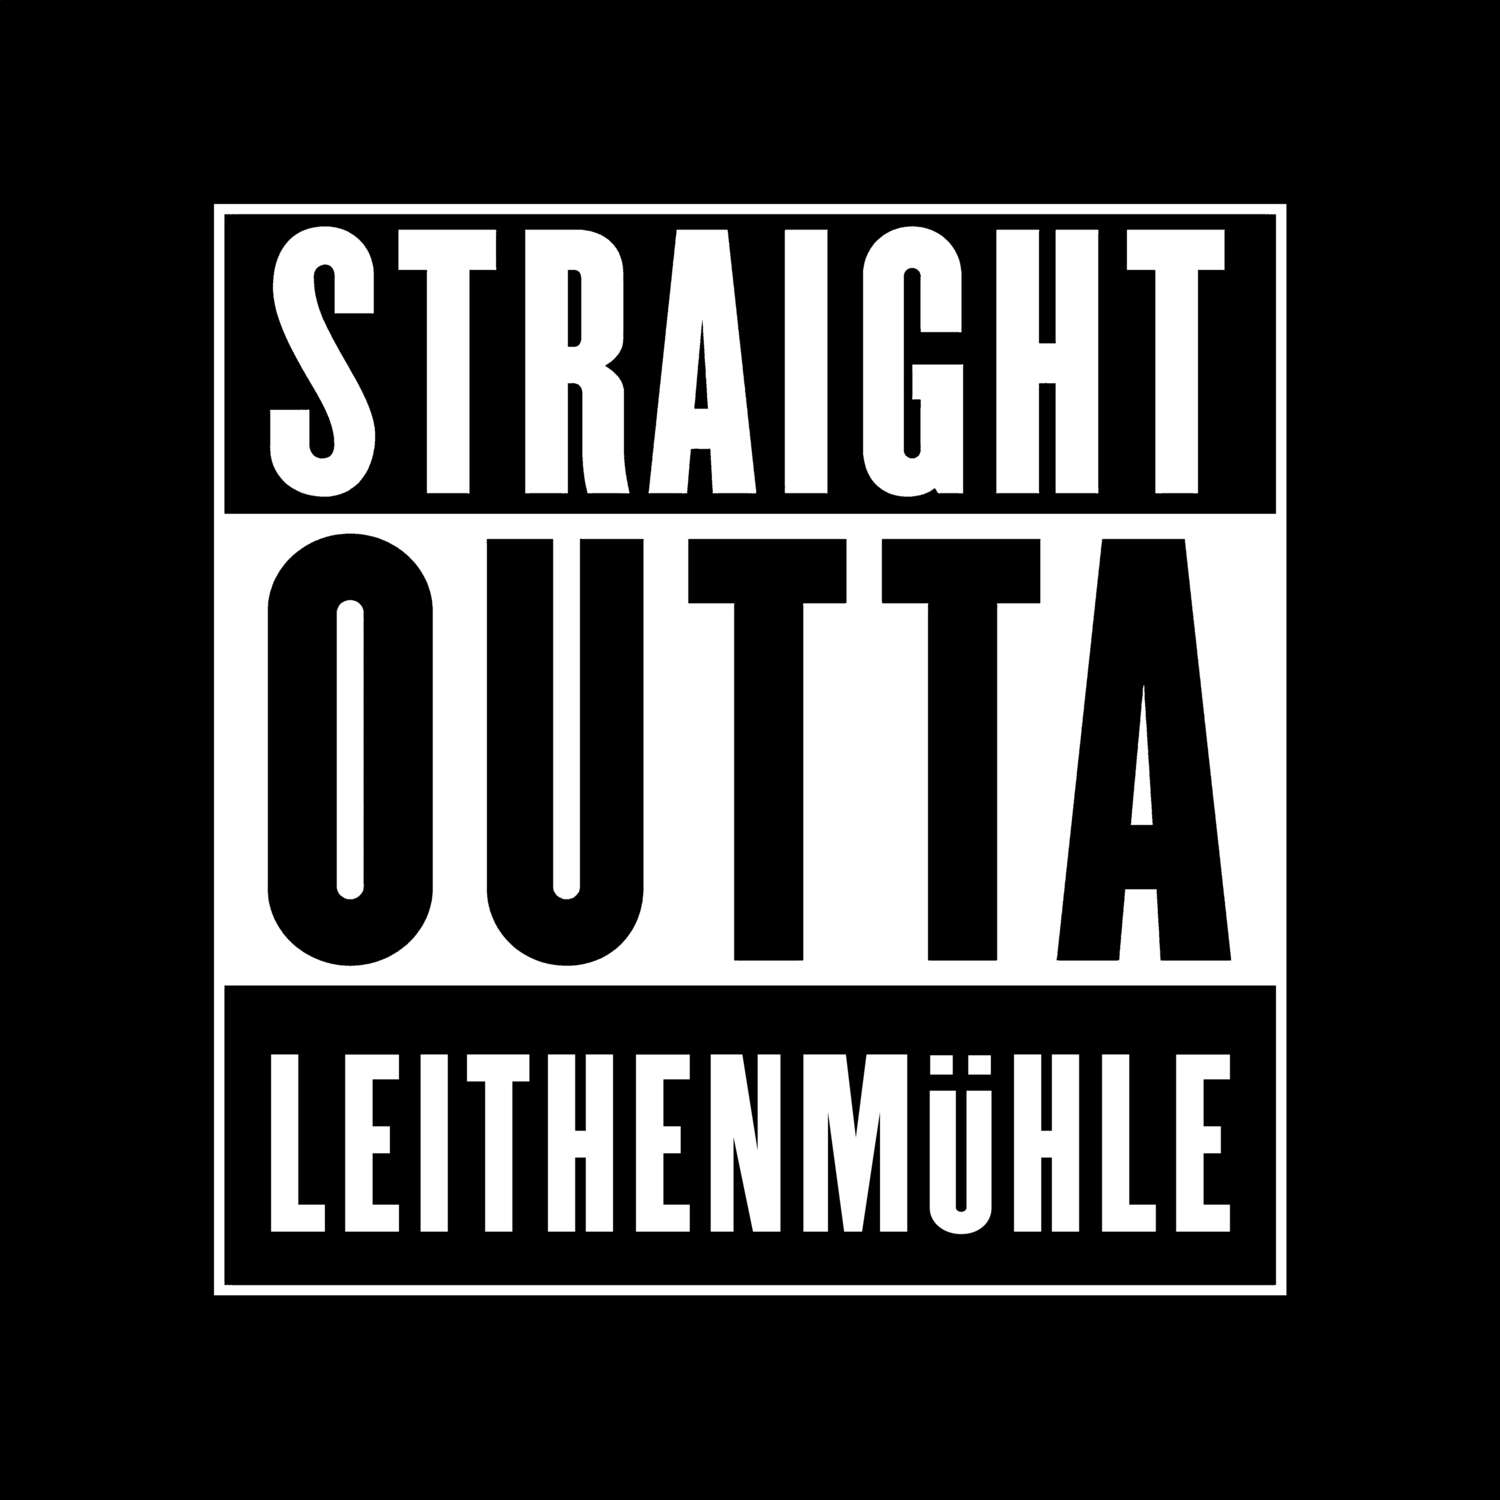 Leithenmühle T-Shirt »Straight Outta«